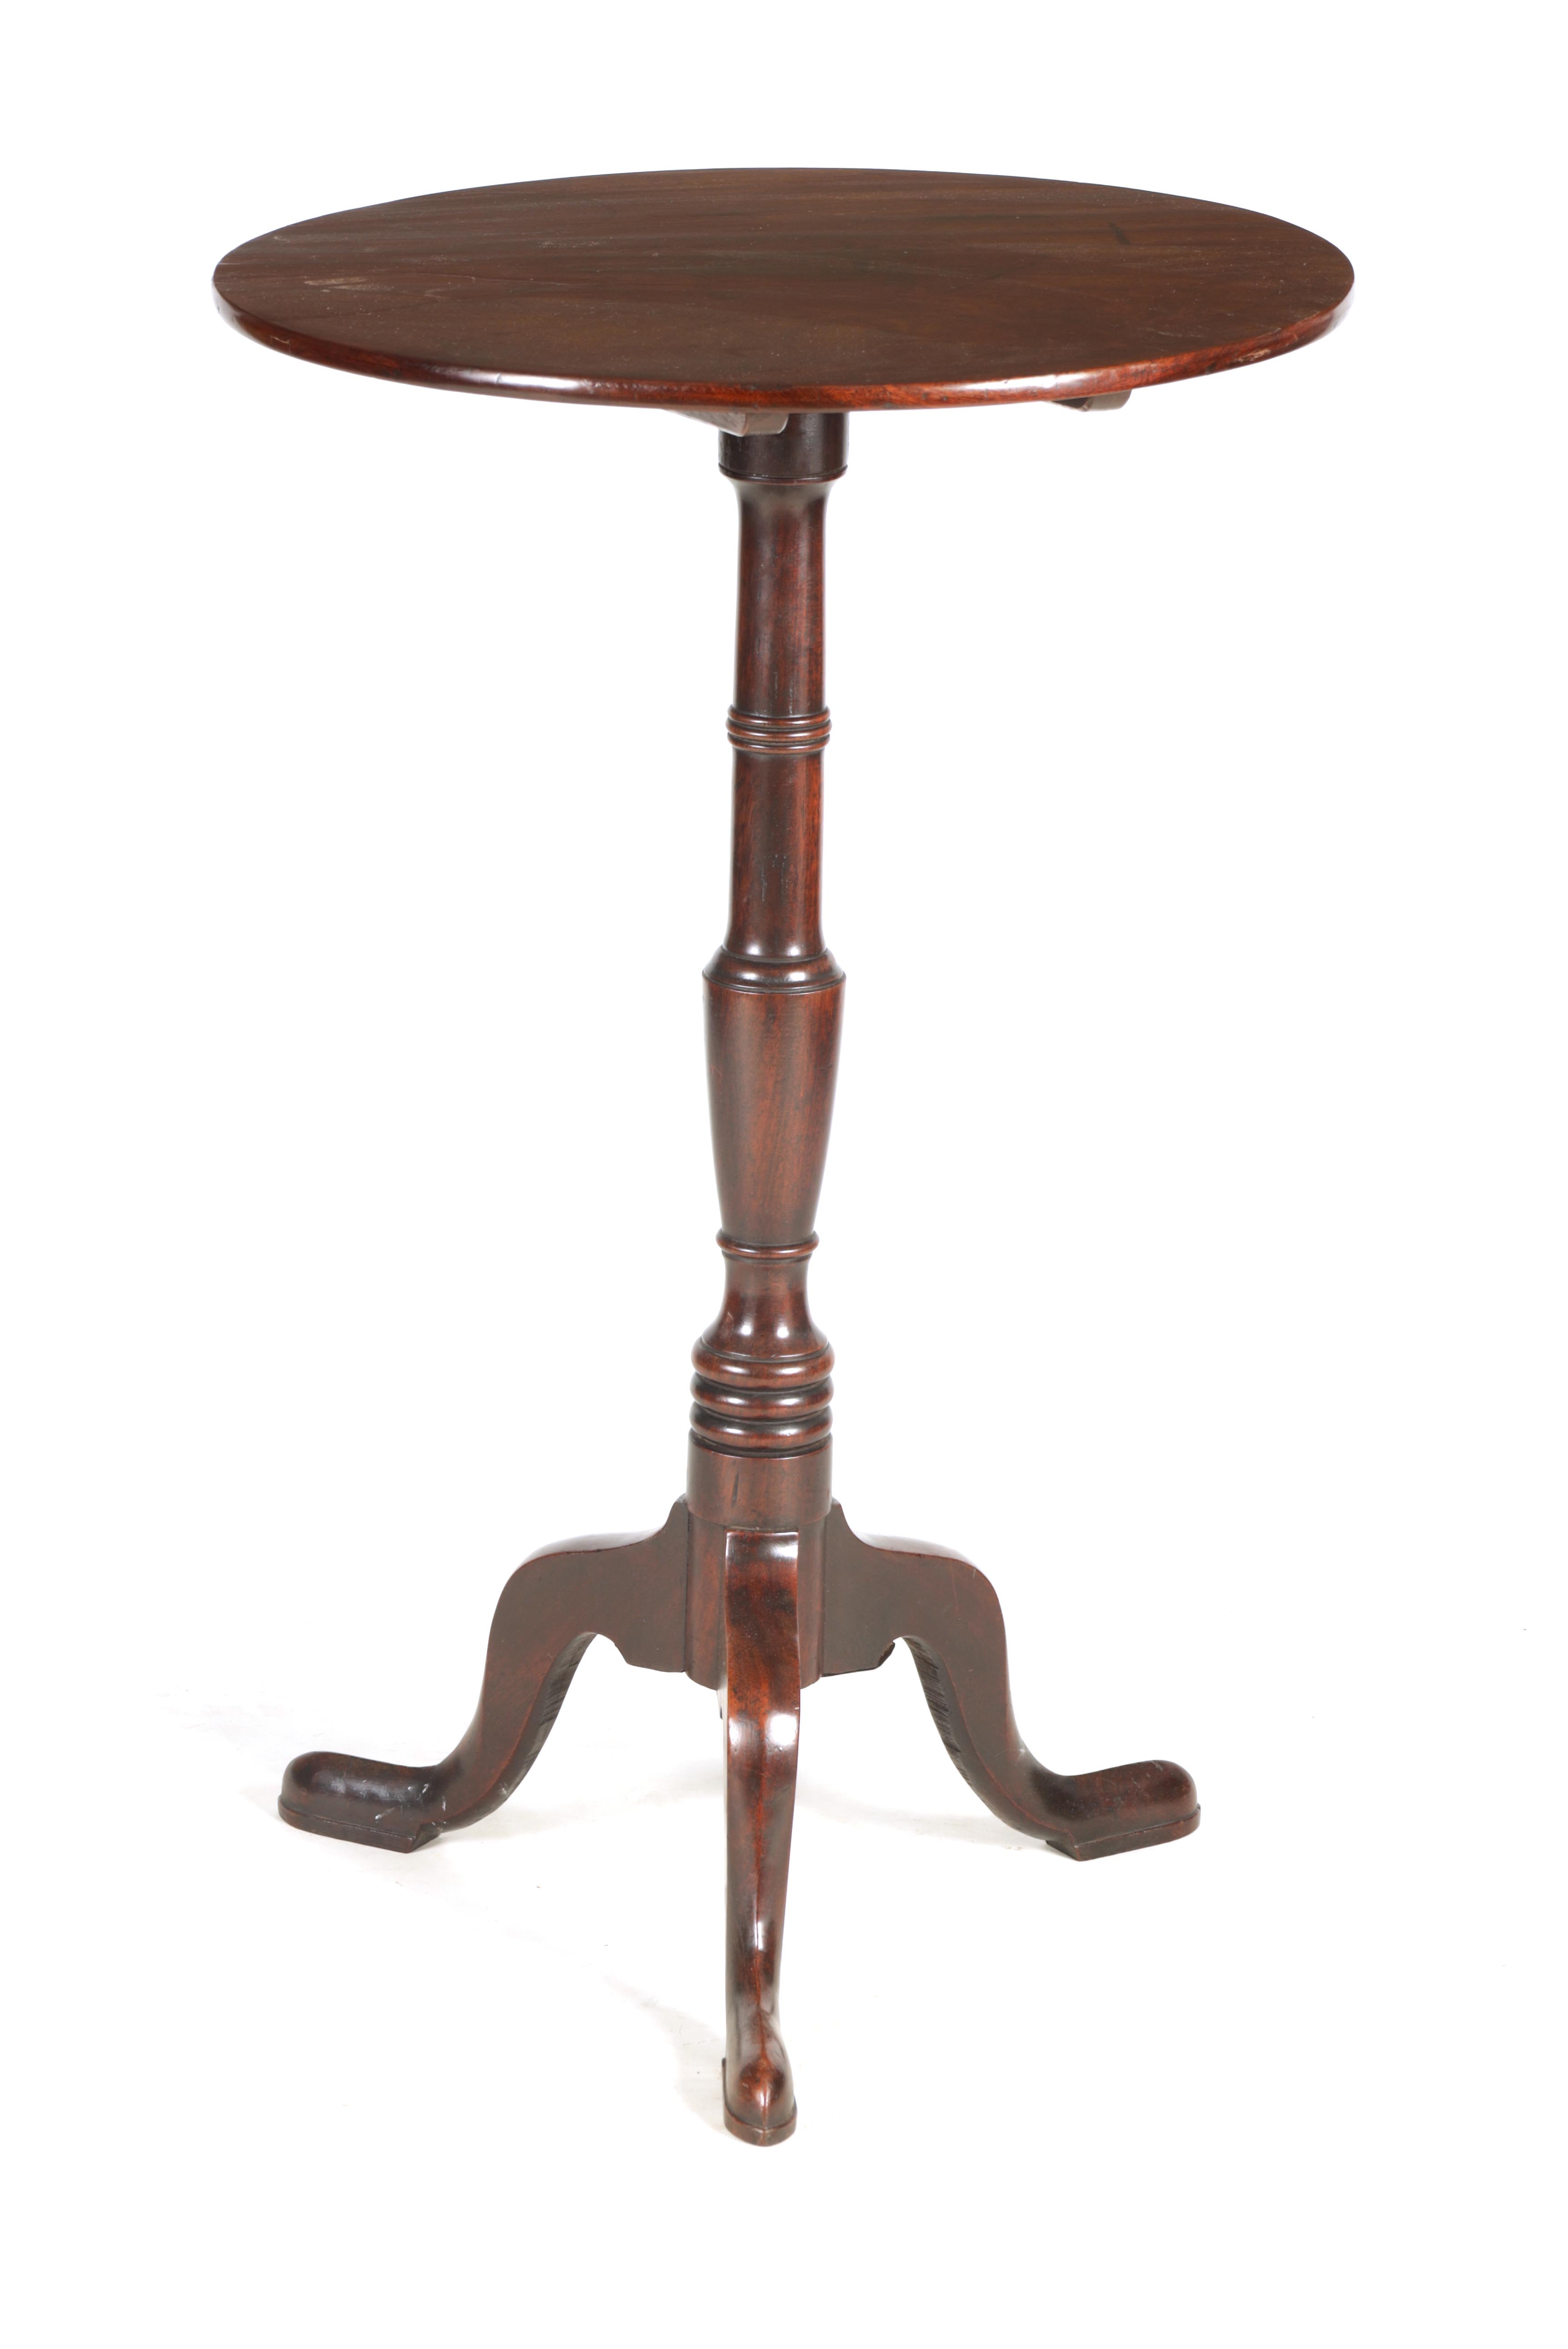 A LATE 18TH CENTURY HEPPLEWHITE MAHOGANY OCCASIONAL/LAMP TABLE with circular top above a vase turned